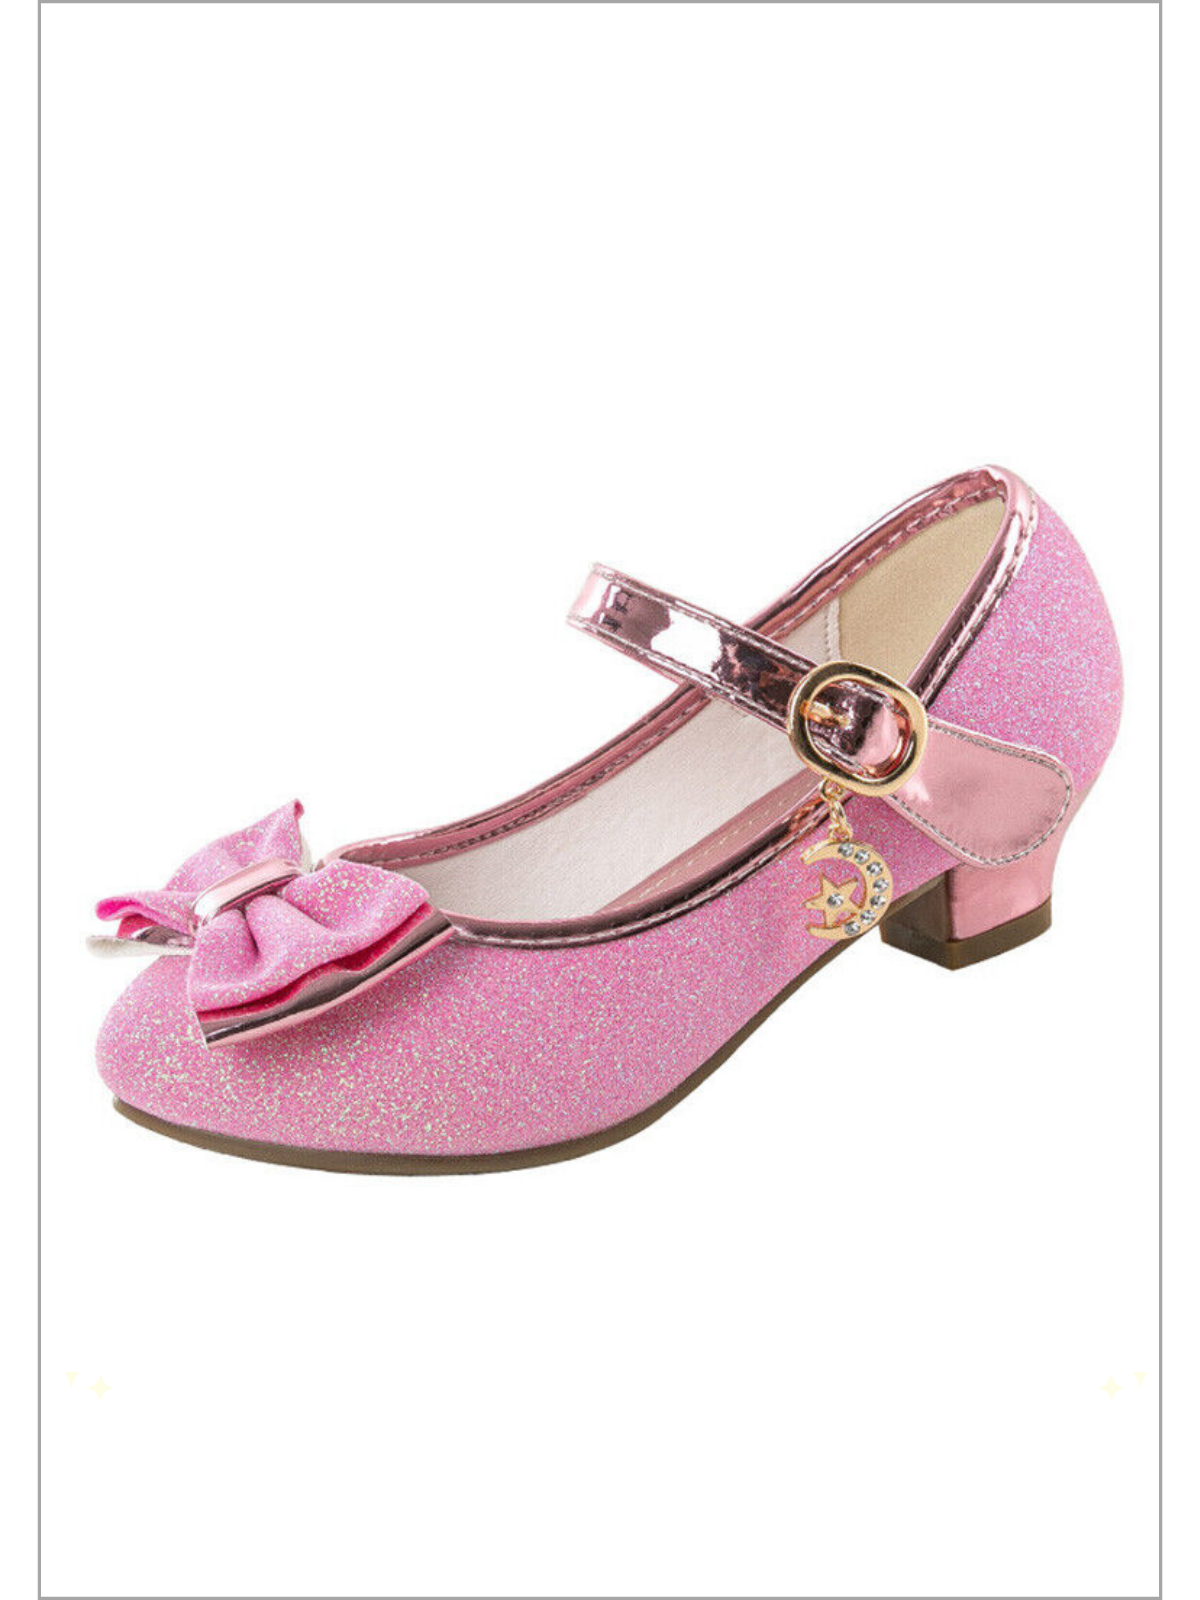 Mia Belle Girls Glitter Princess Heels | Shoes By Liv and Mia